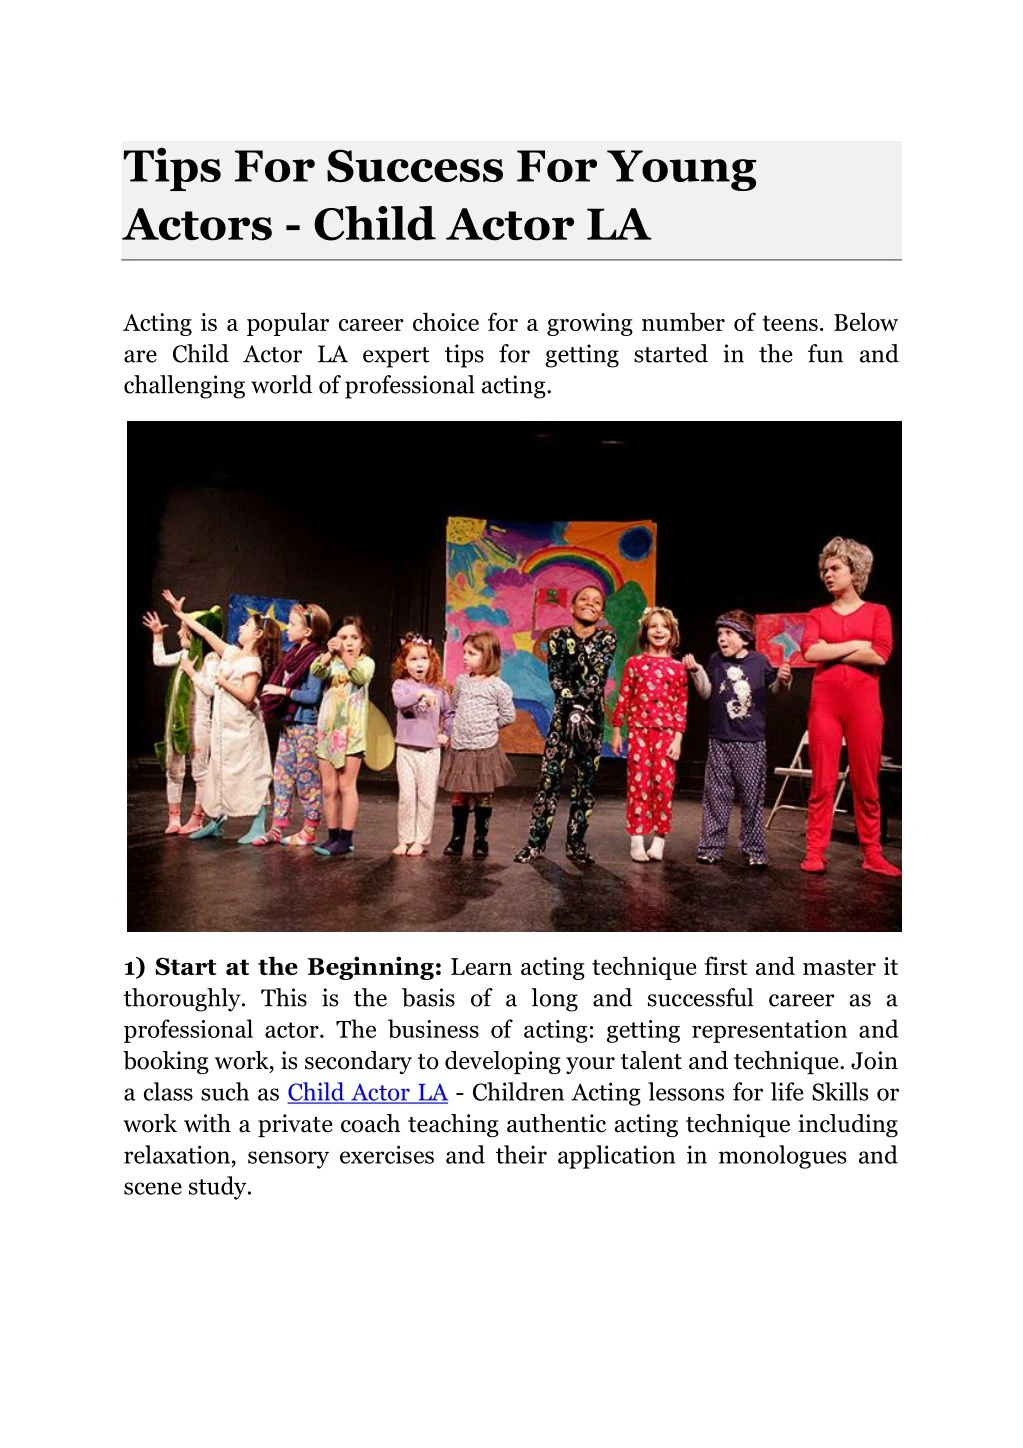 tips for success for young actors child actor la